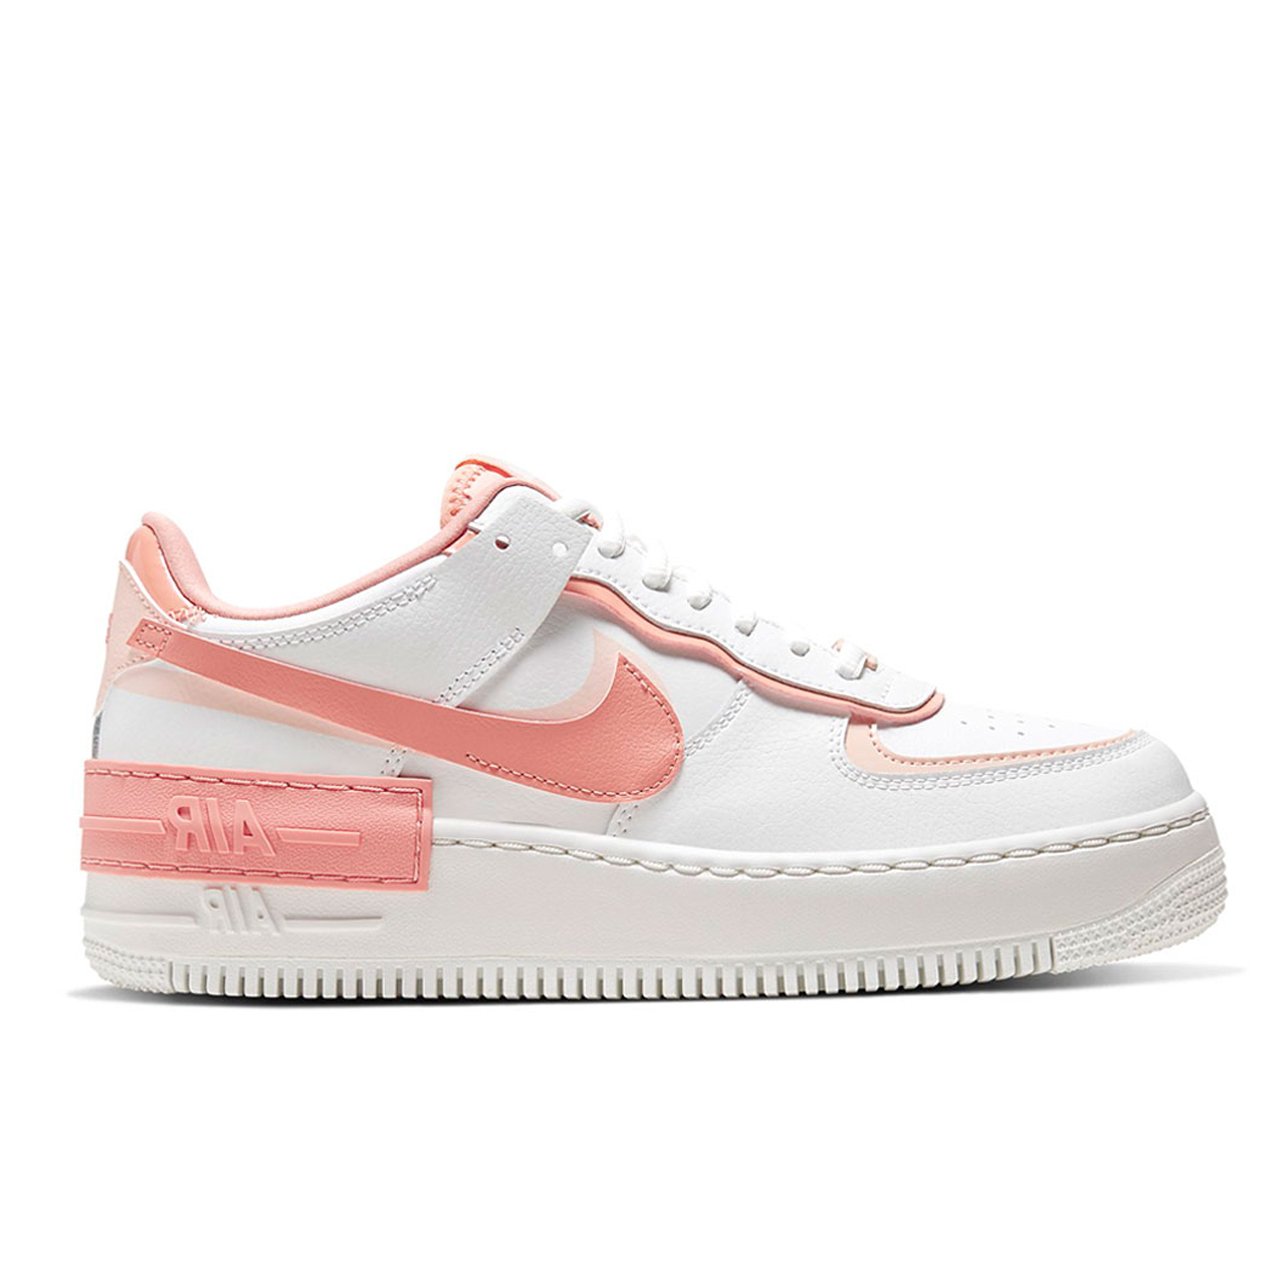 Nike Air Force 1 Shadow White Pink 